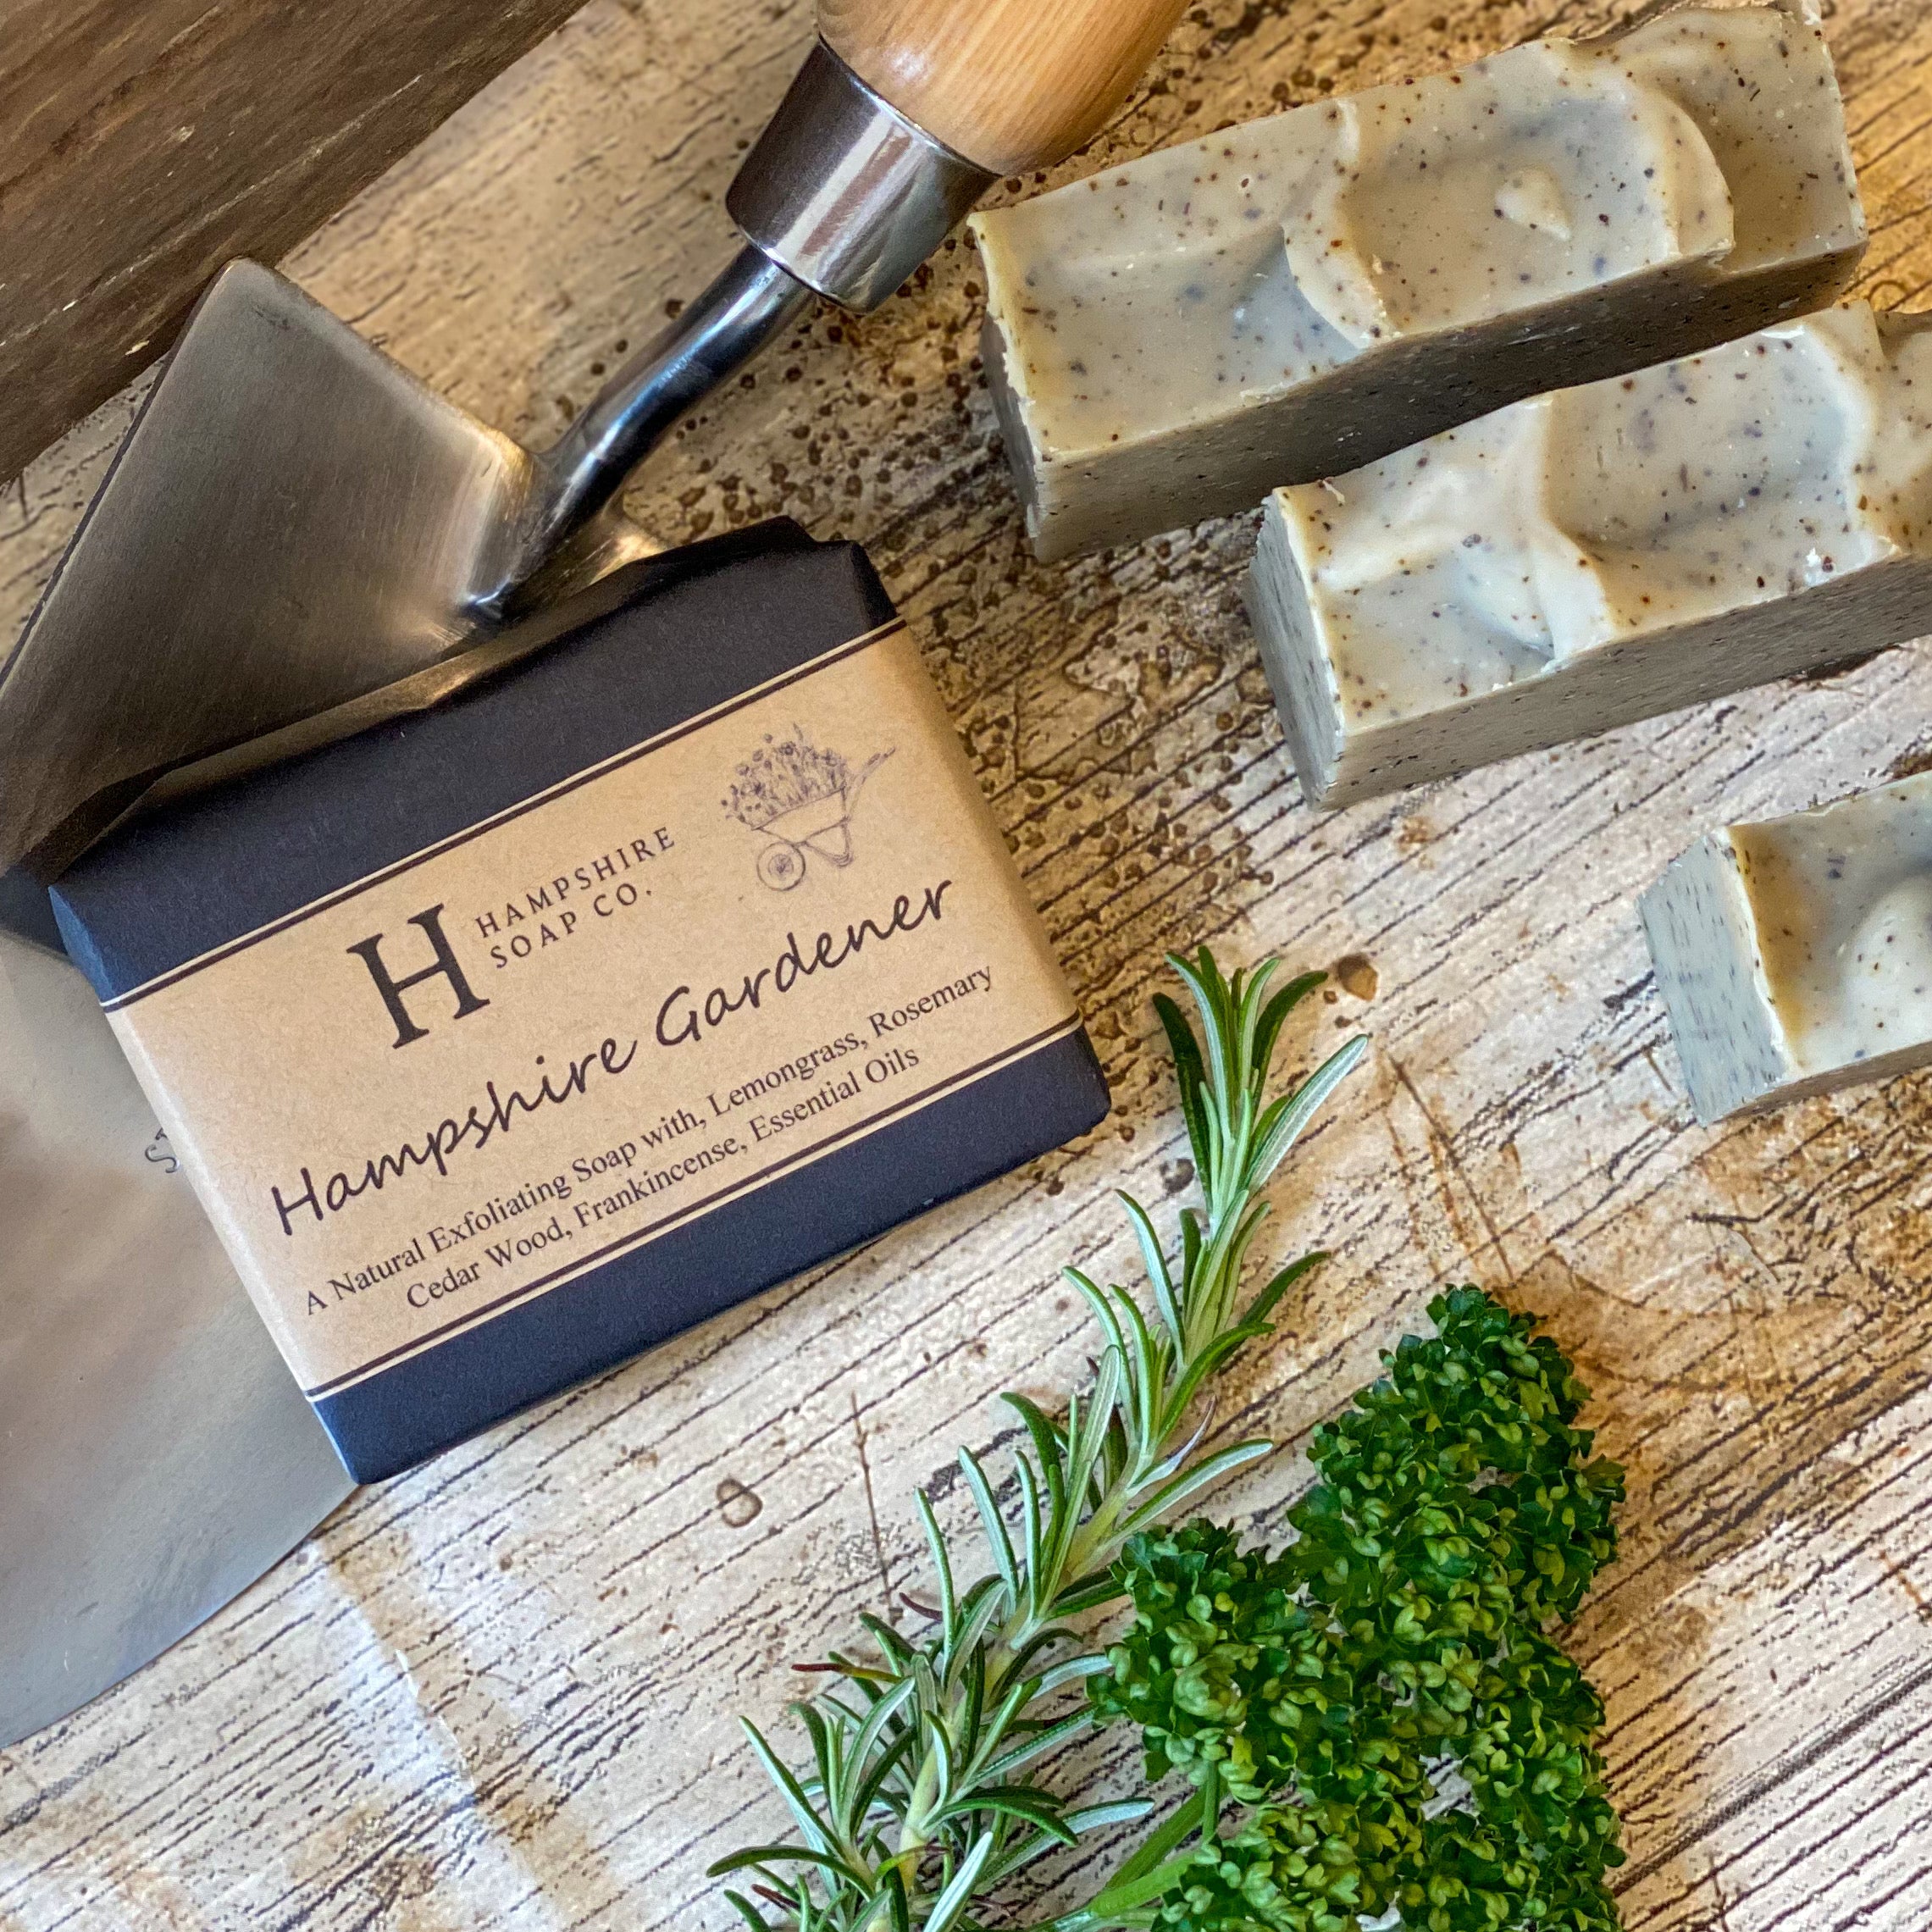 Hampshire Gardeners Soap - Deep Cleansing Clay Soap with a blend of Cedar Wood, Frankincense, Lemongrass and Rosemary Essential Oils